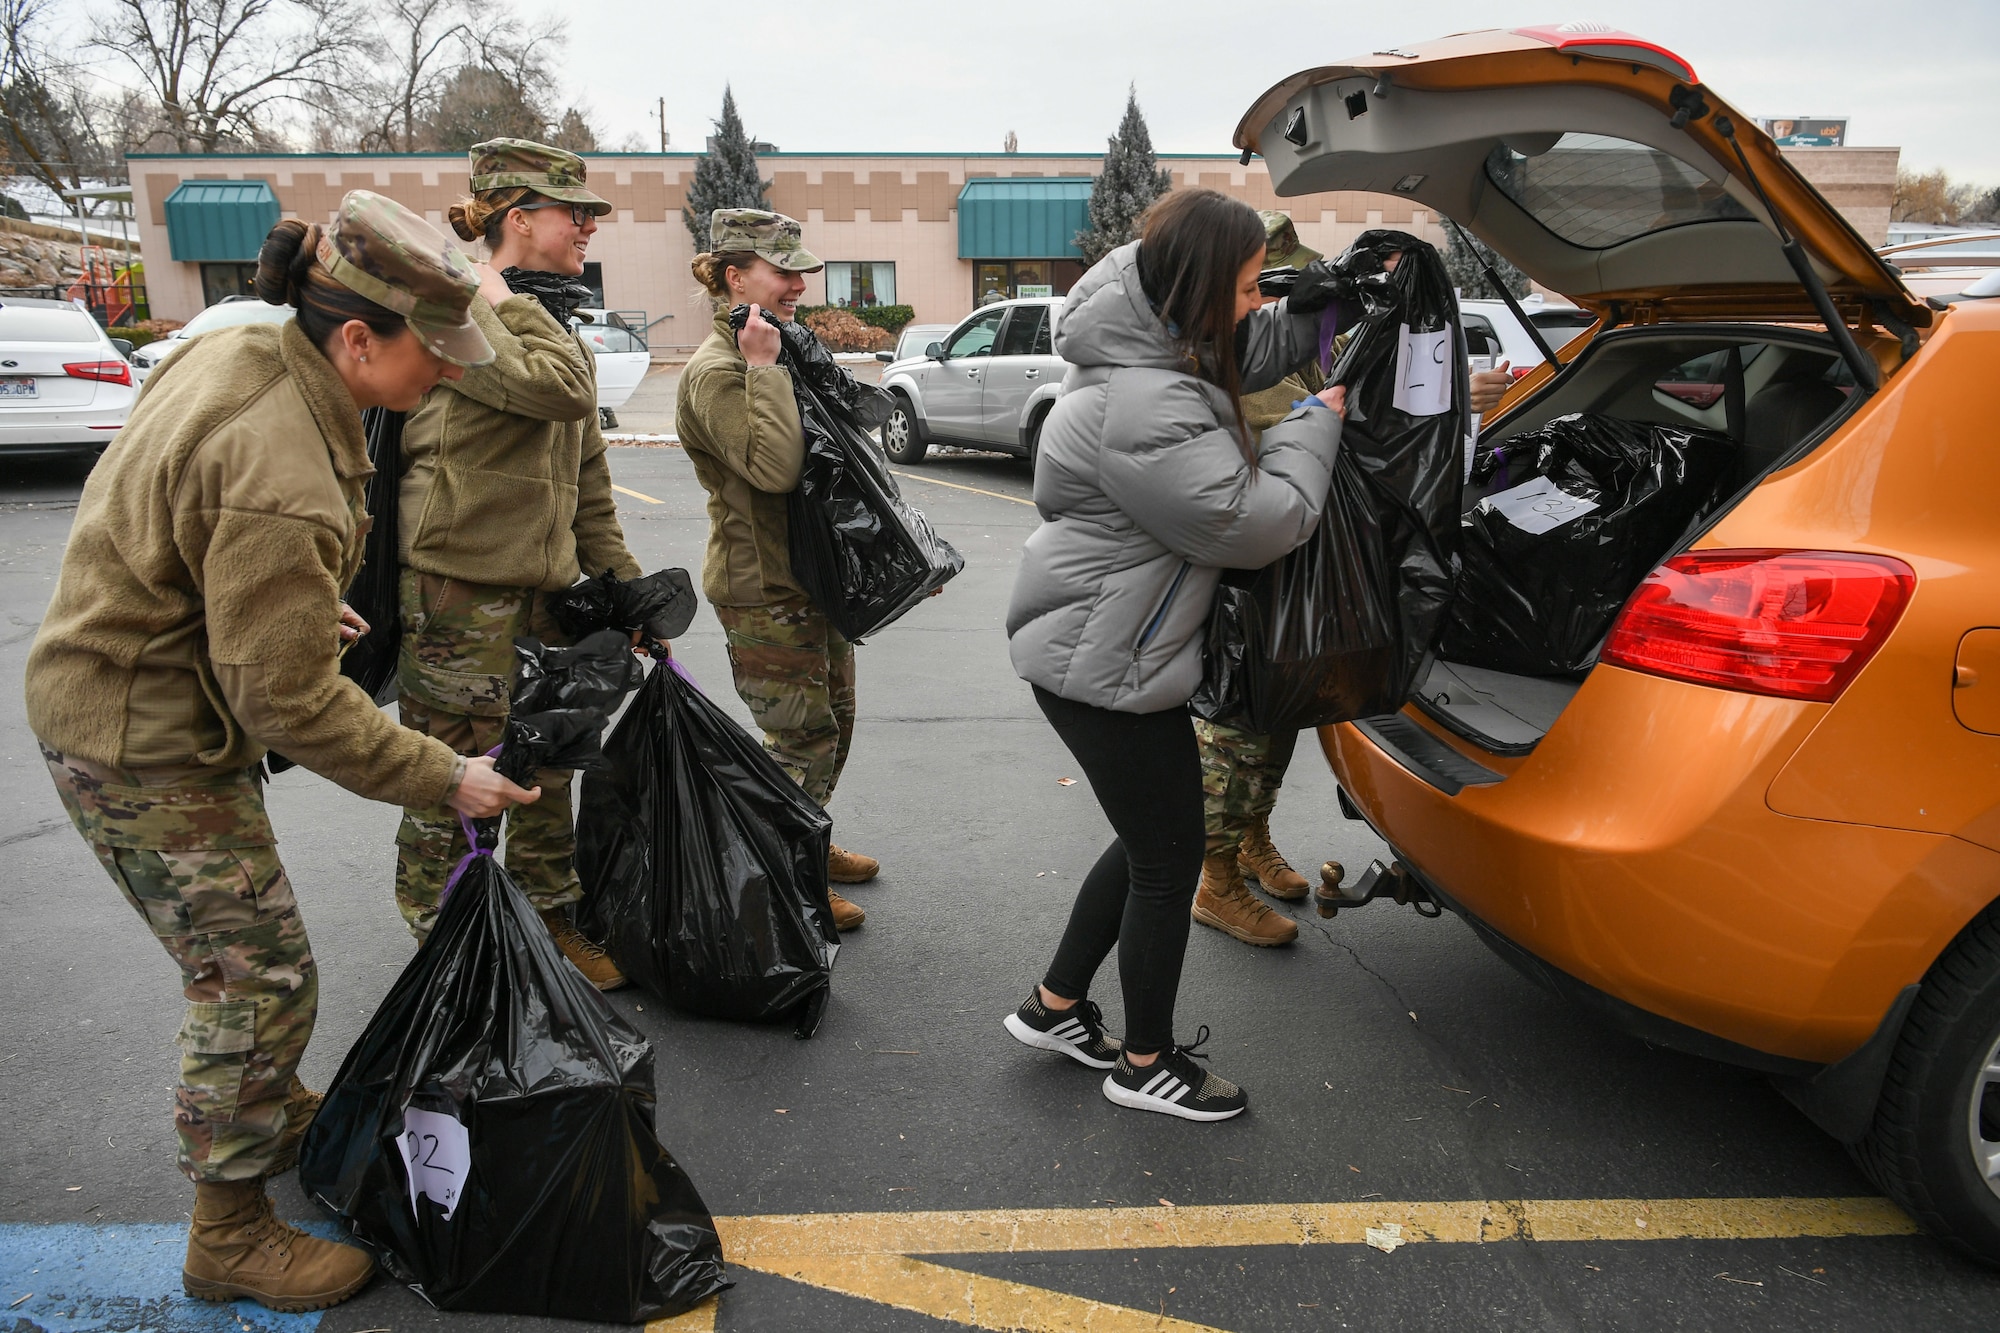 Airmen from Hill Air Force Base, Utah, load up bags of wrapped gifts at Utah Foster Care Foundation in Ogden before delivering gifts to foster children Dec. 18, 2019, as part of a volunteer effort called Santa Brigade.  Around 85 Airmen from various commands played Santa for the day delivering 537 gifts to over 140 foster care families around Northern Utah. (U.S. Air Force photo by Cynthia Griggs)